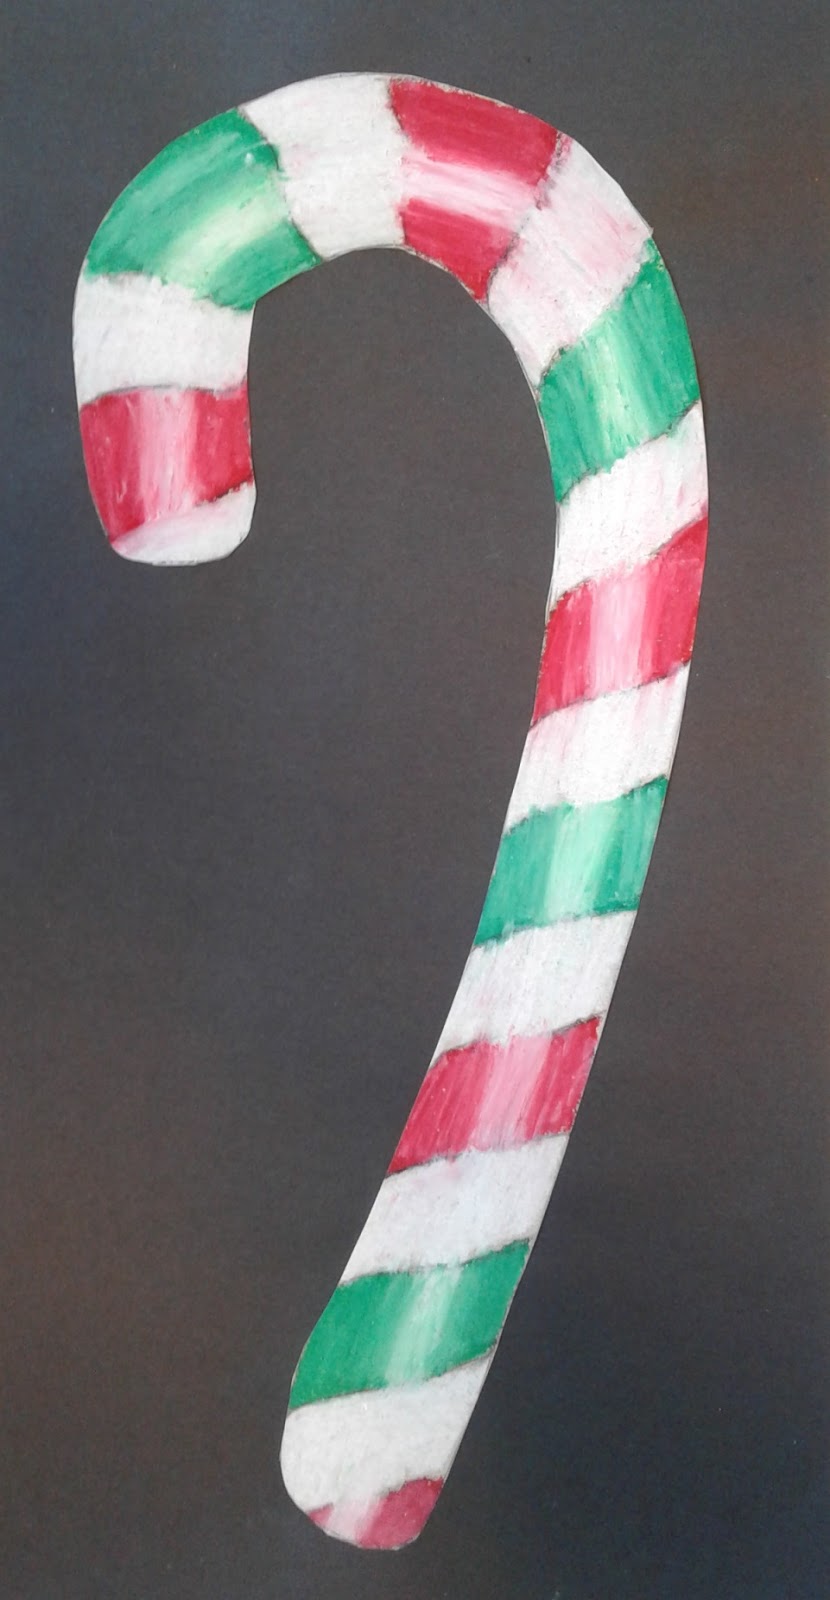 a faithful attempt: Candy Canes in Oil Pastel